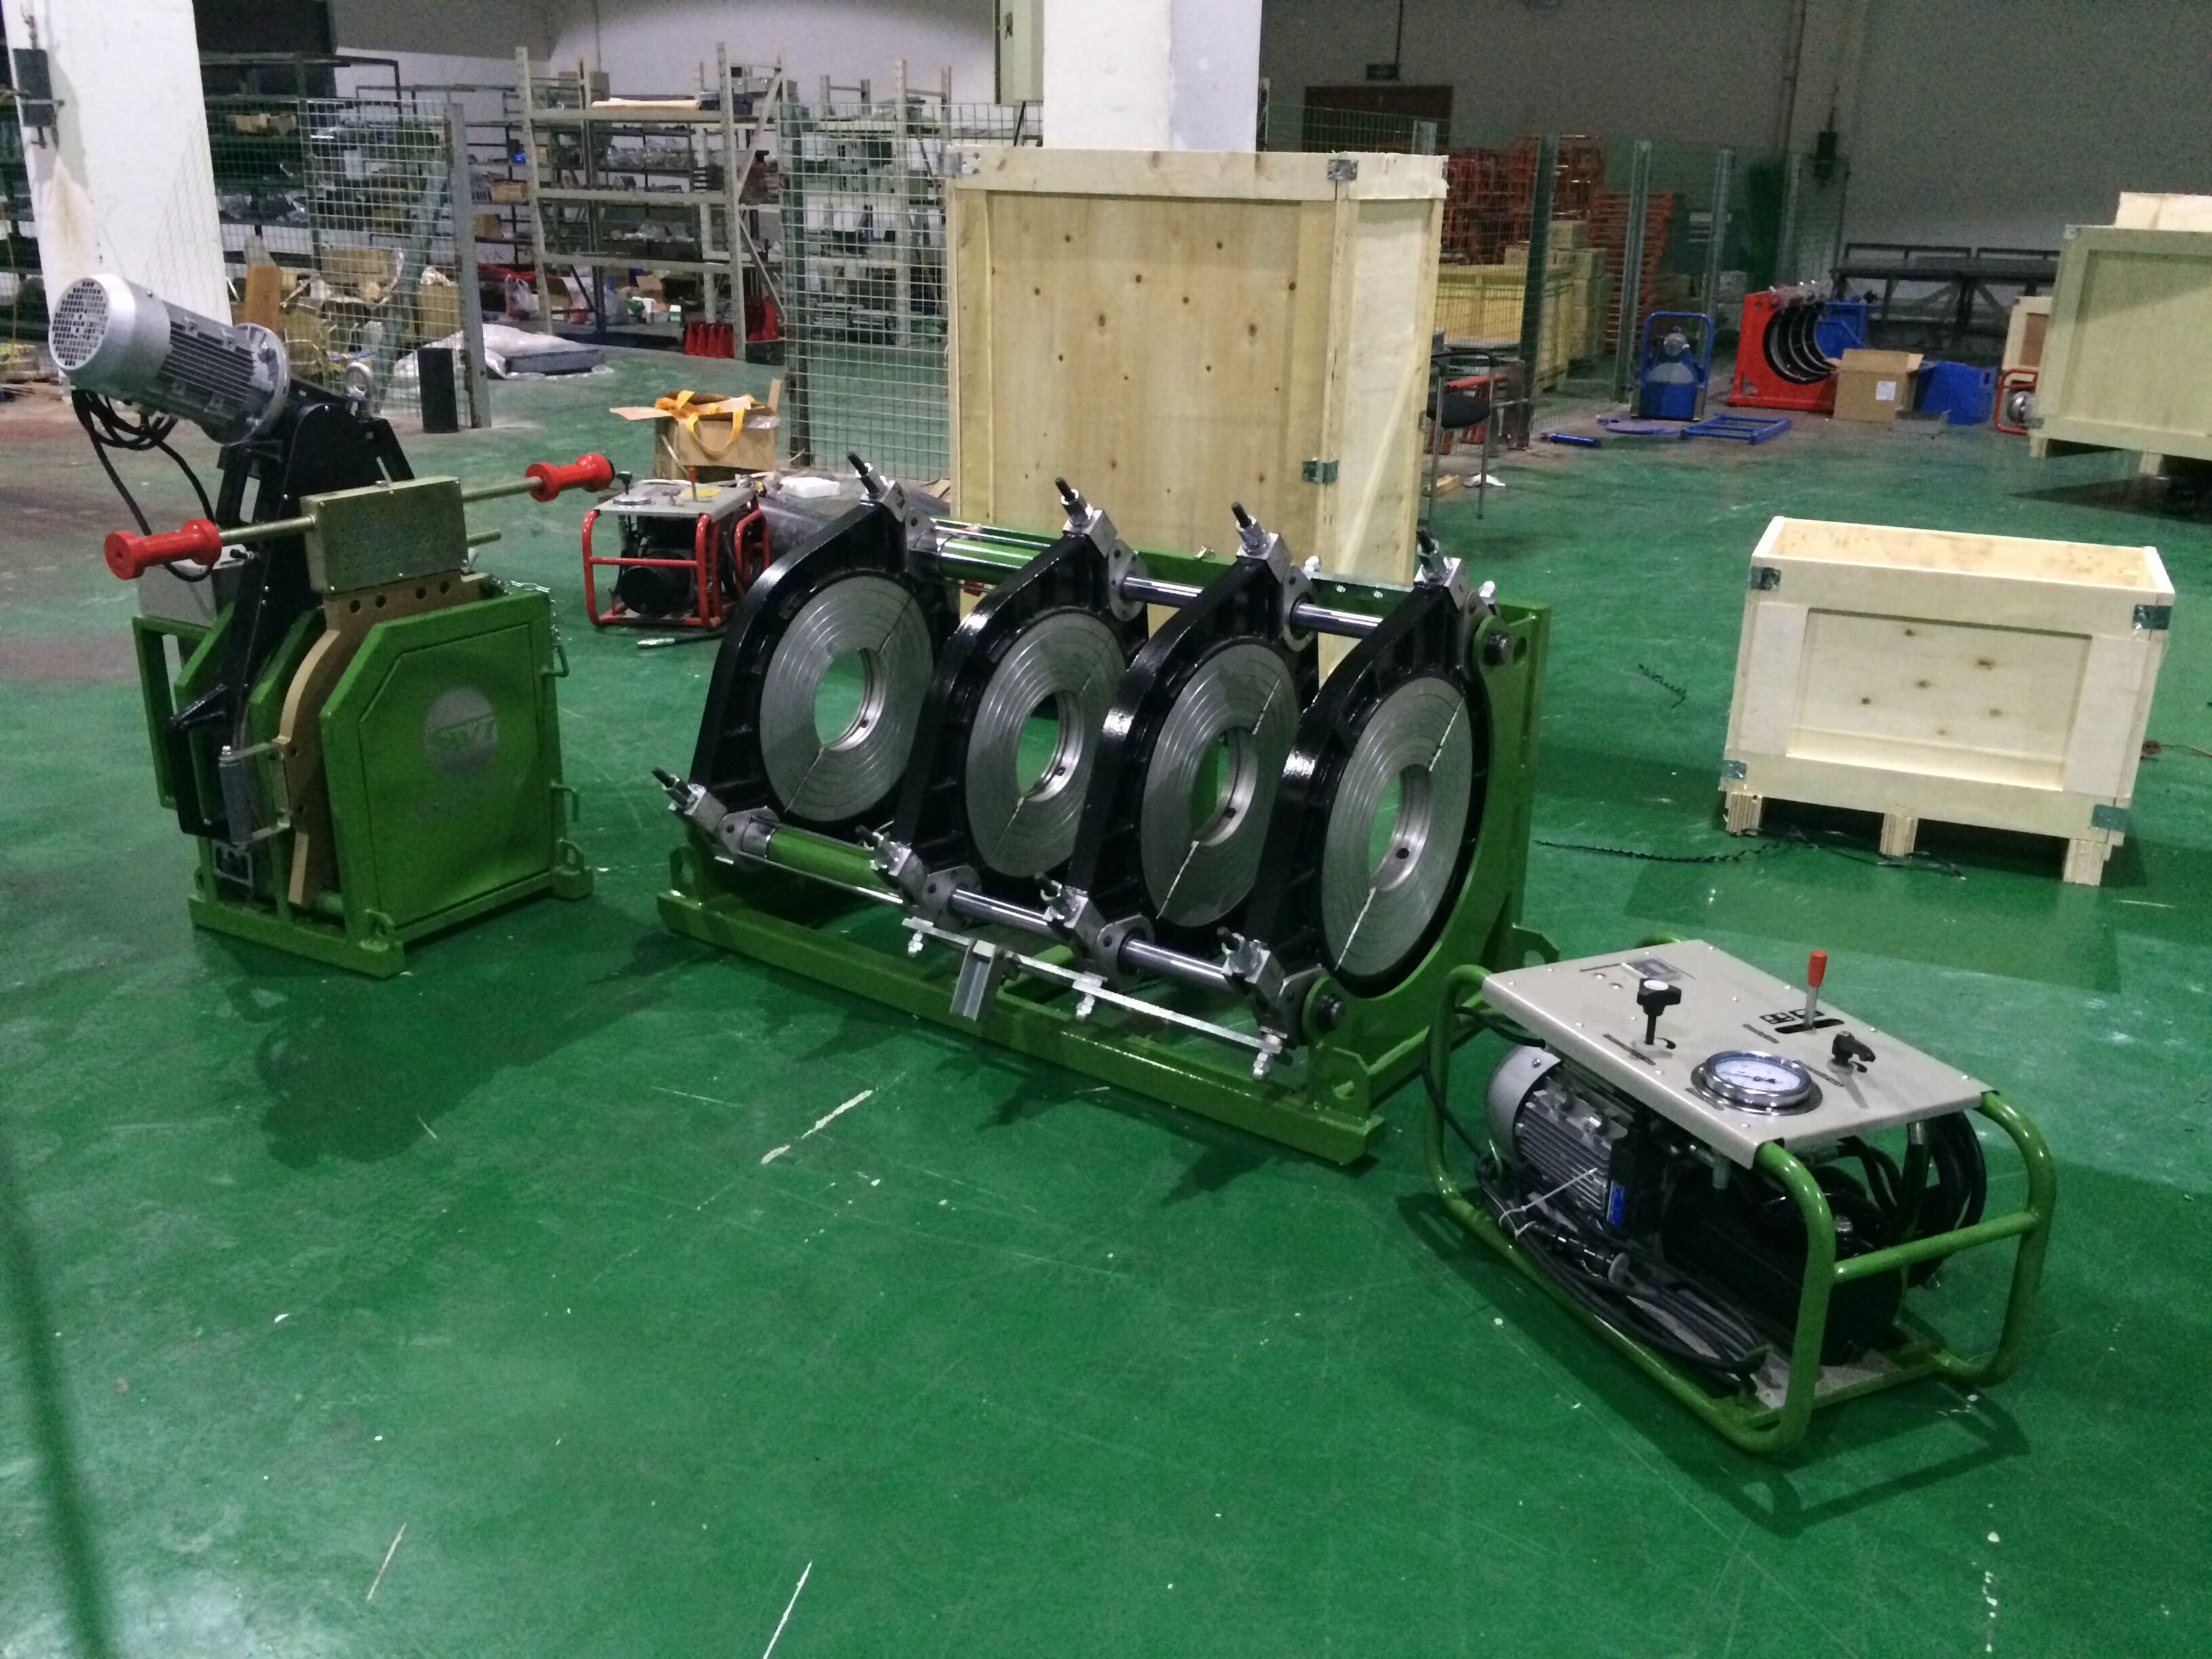 SWT-B450/200H 380V 3 Phase hdpe welding machine manual for 450 HDPE pipes and fittings